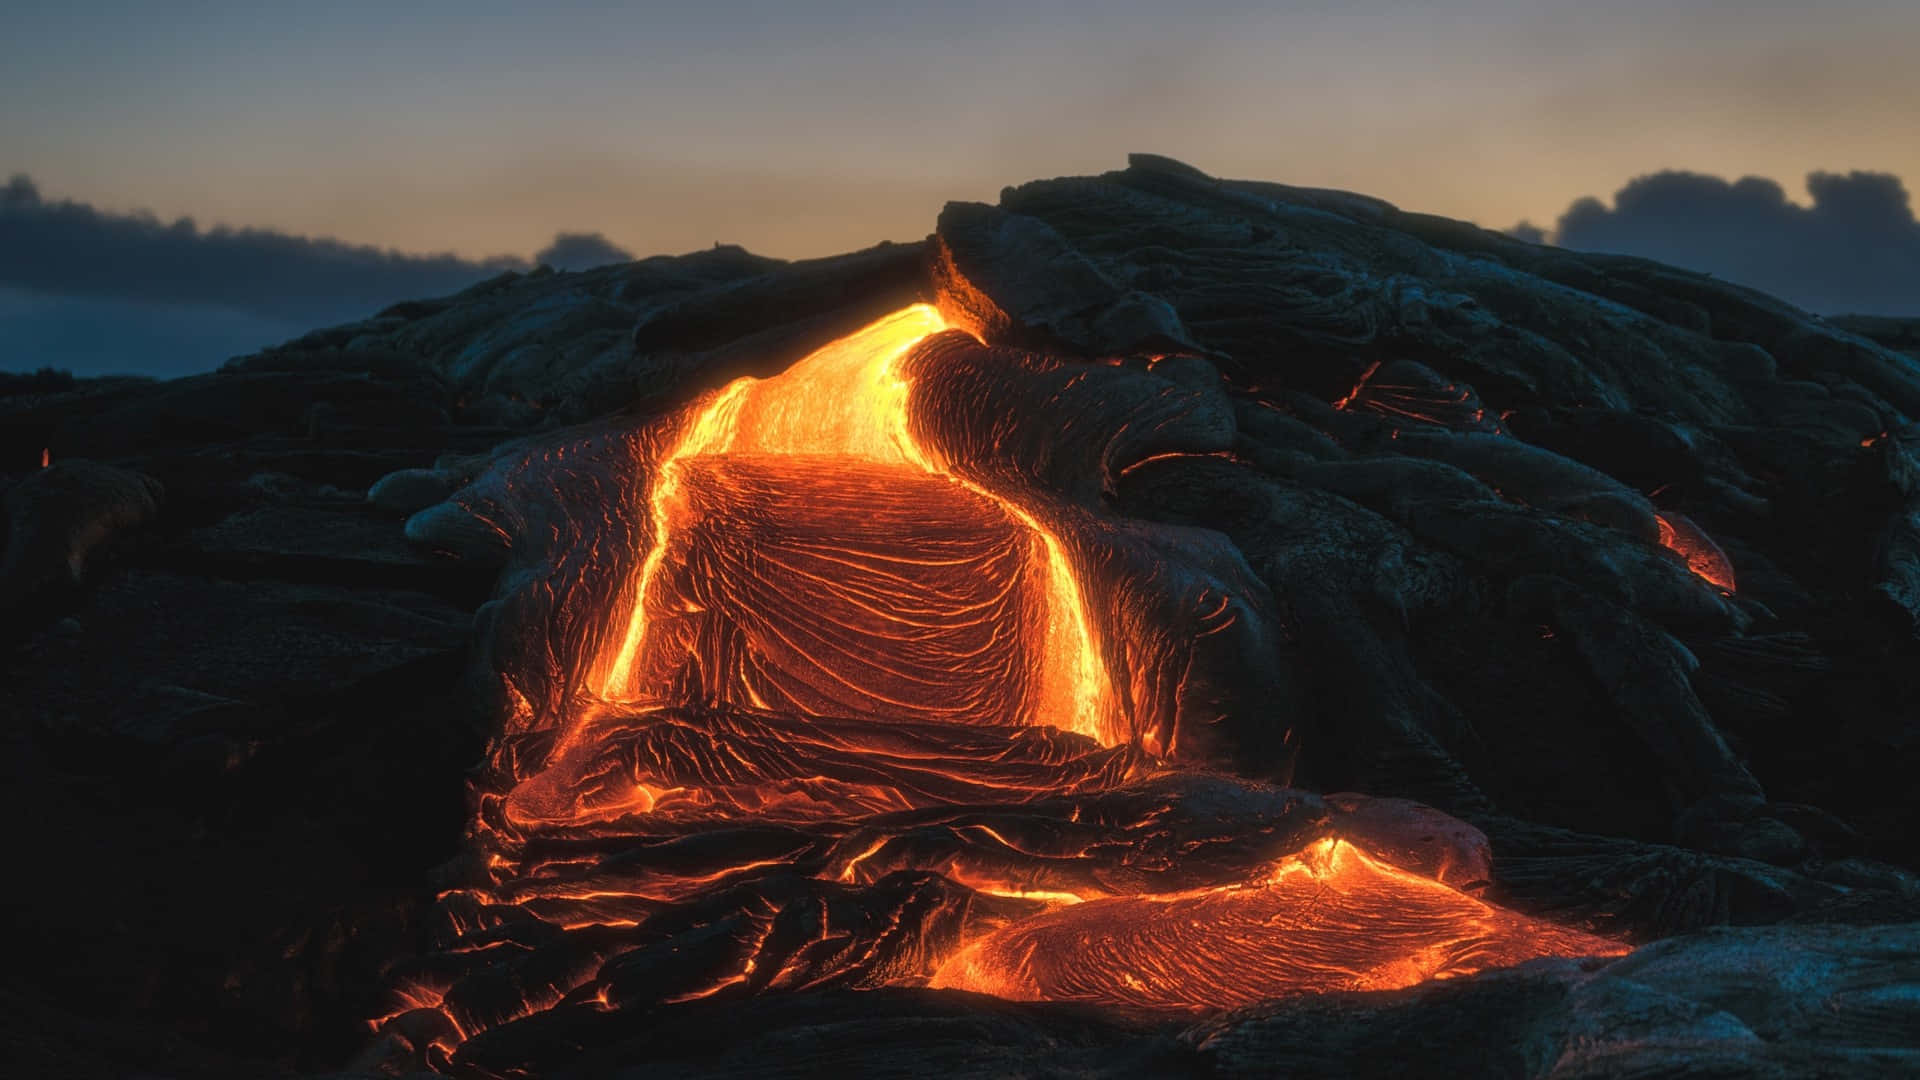 “An Incredible View of an Active Volcano”